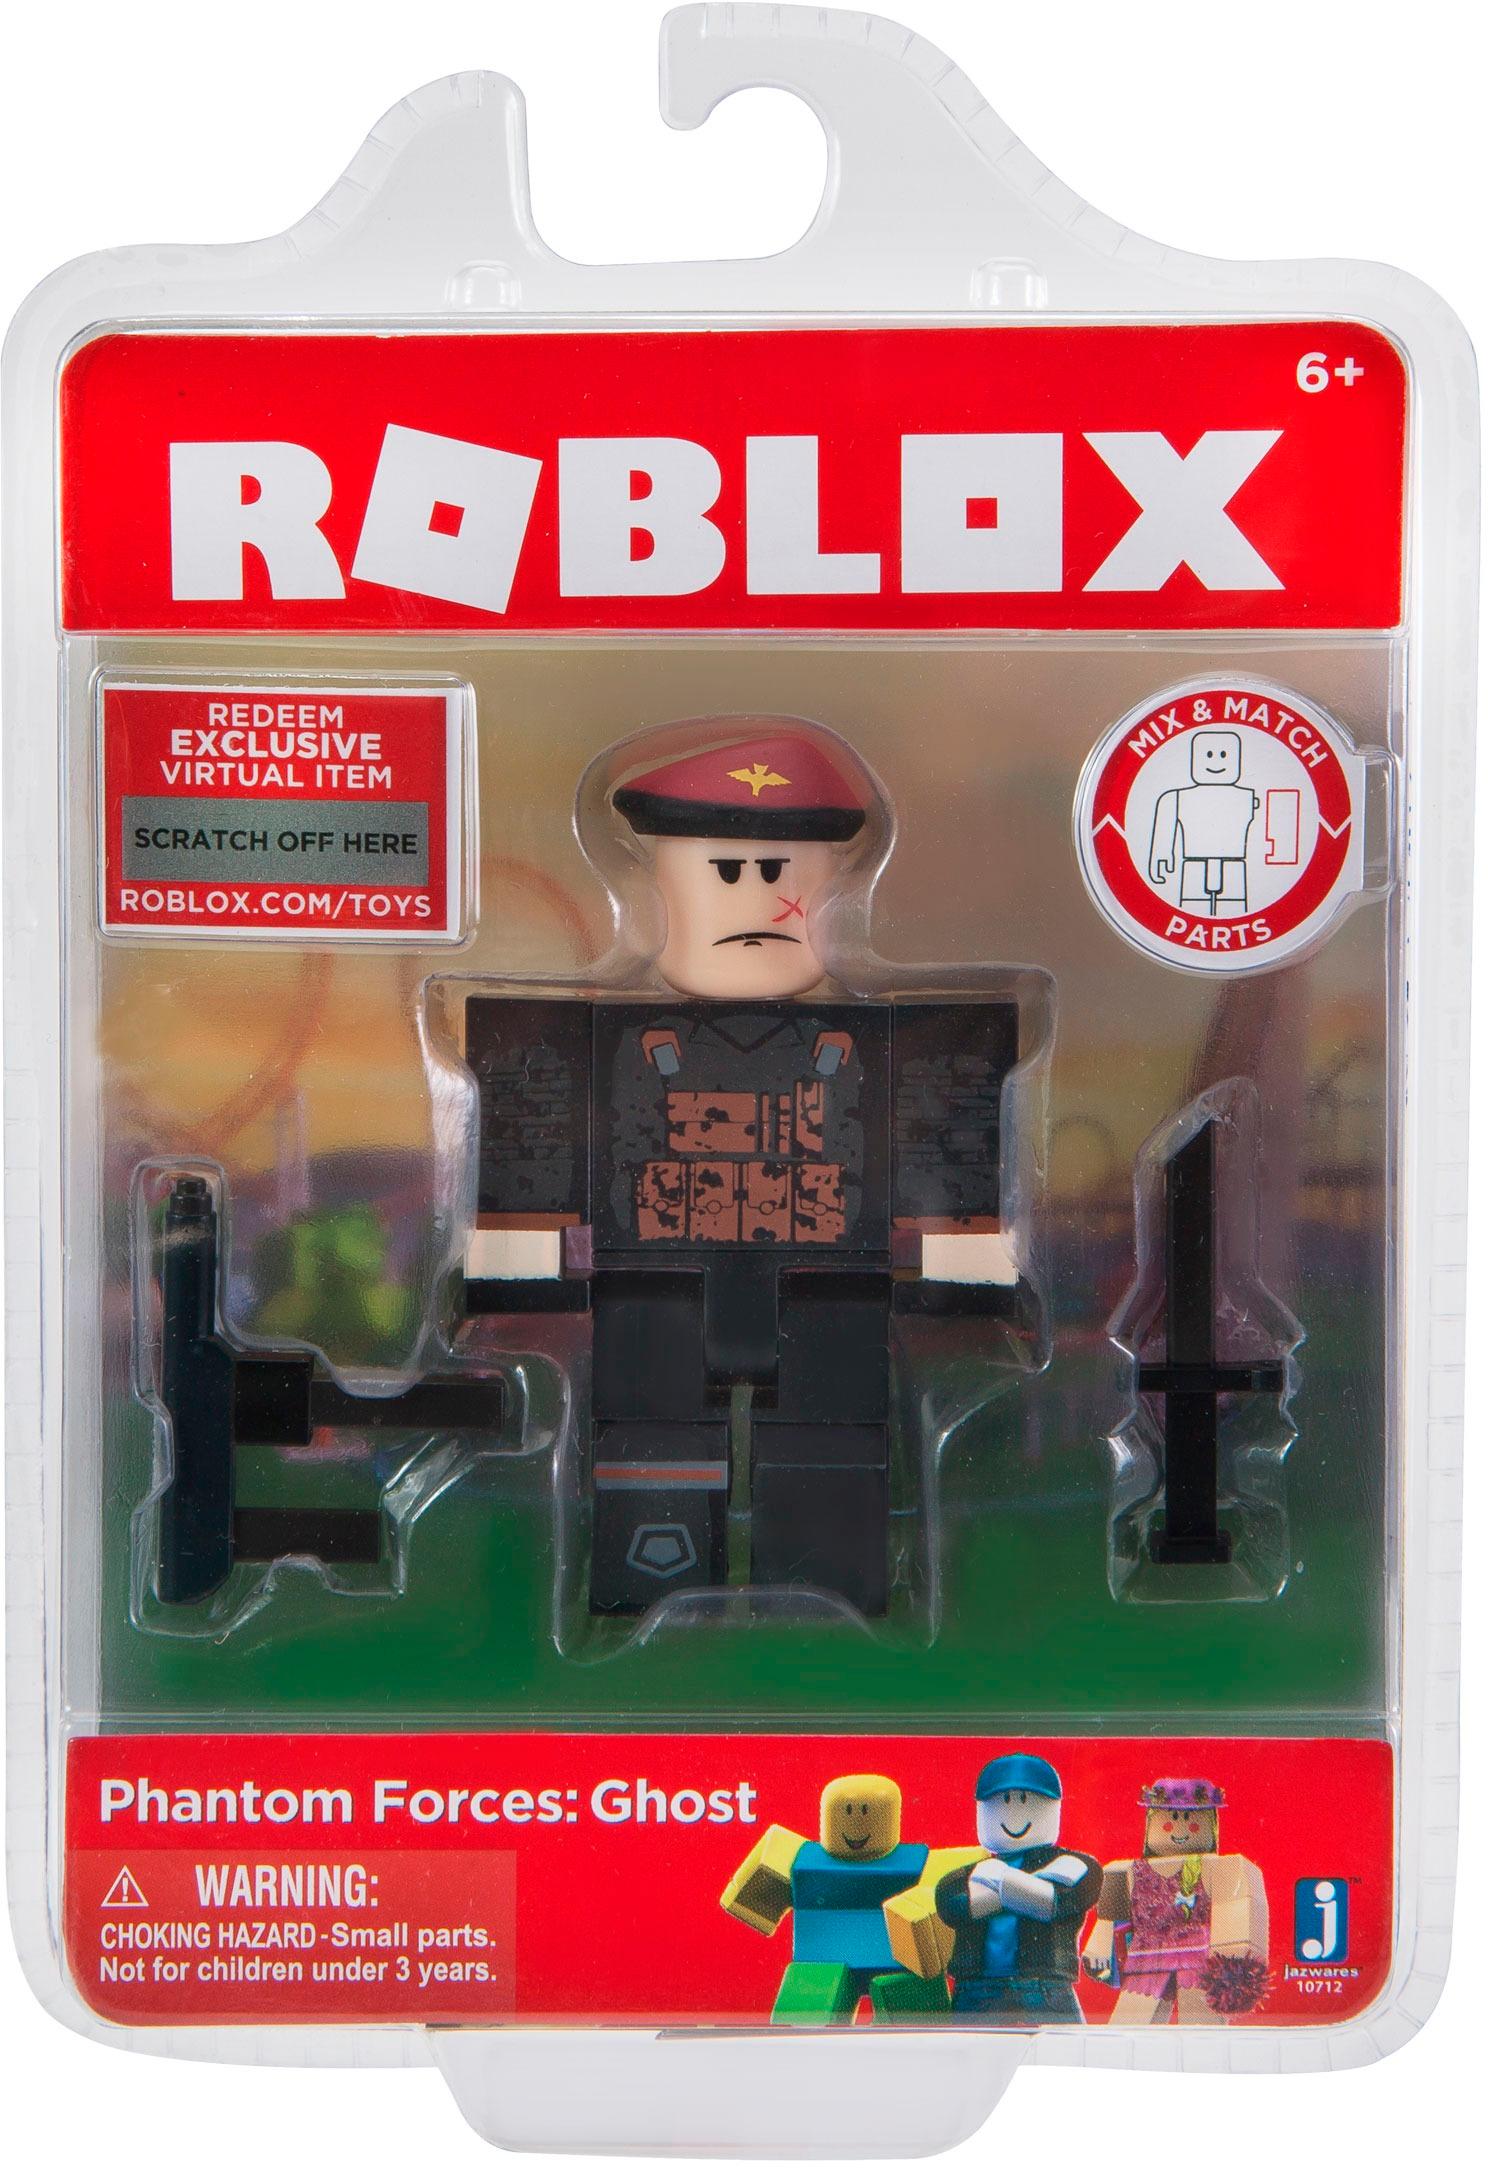 Best Buy Roblox Core Figure Styles May Vary 10705 - roblox series 5 core packs